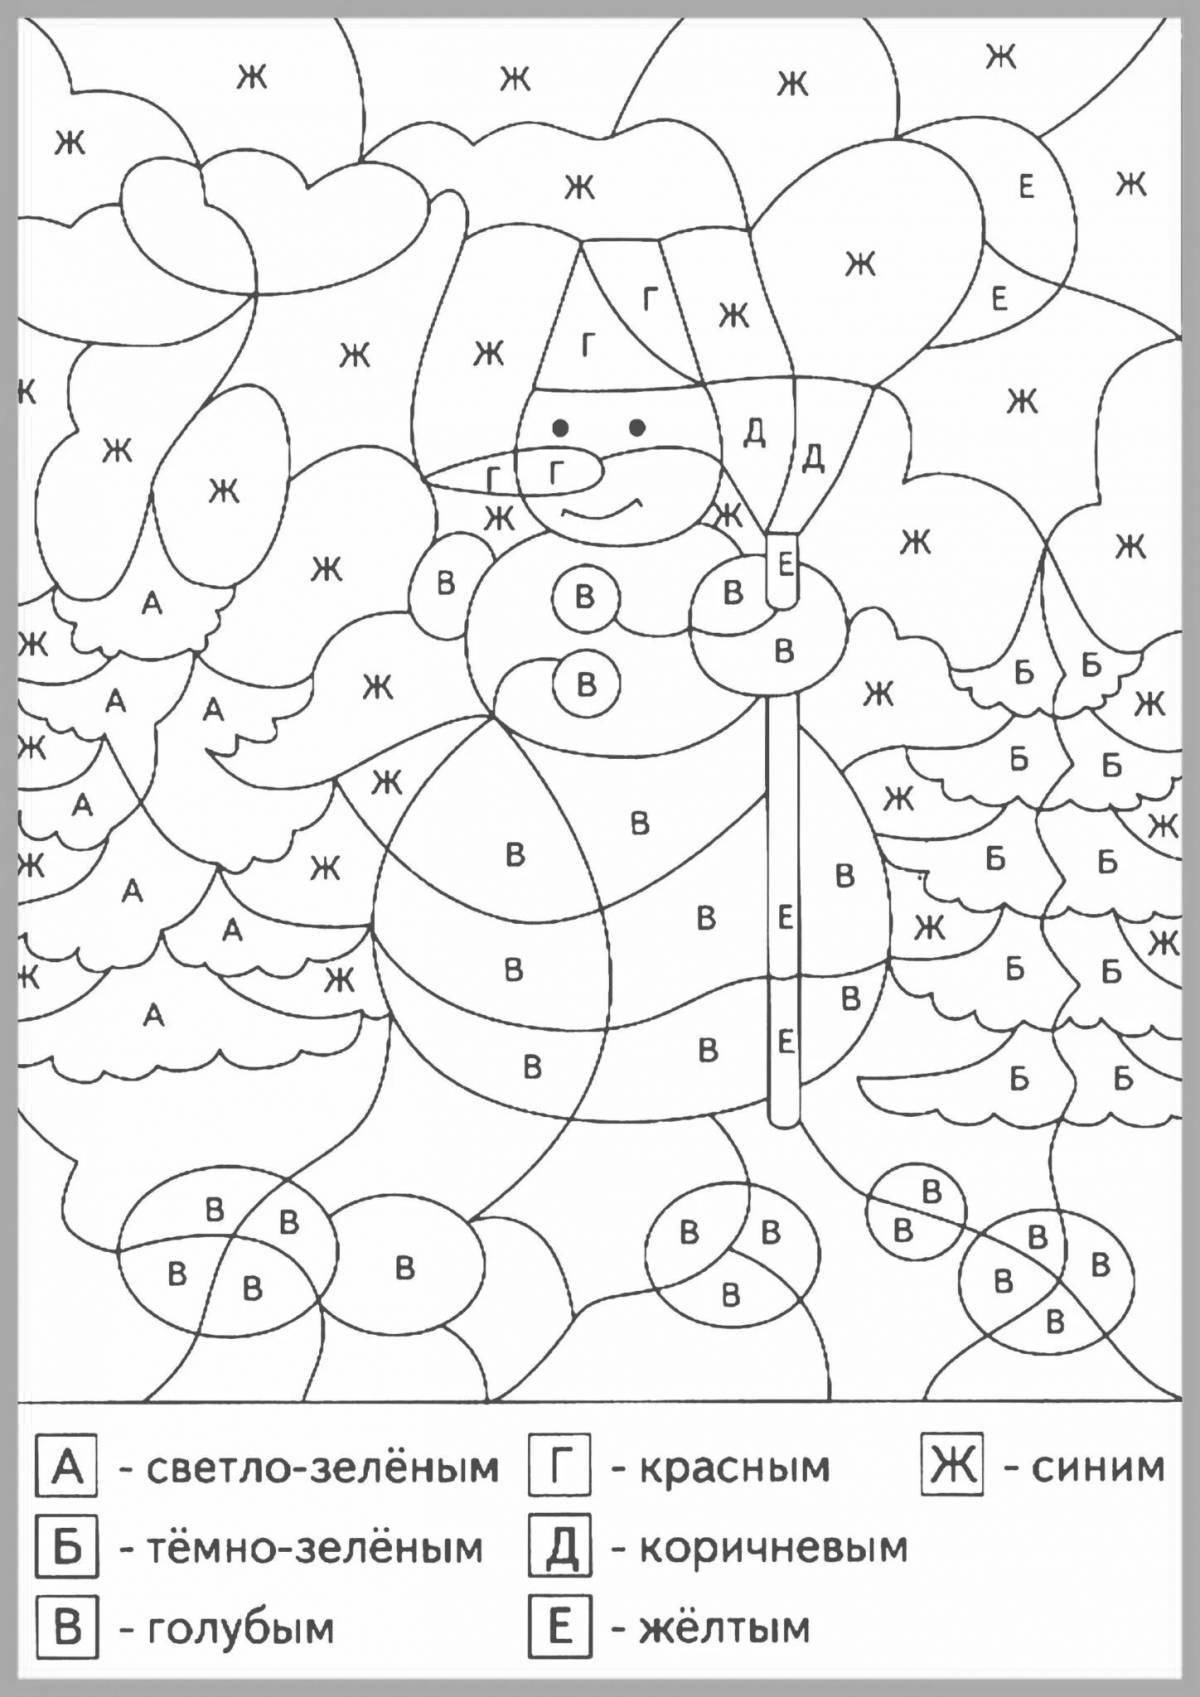 Happy new year coloring by numbers